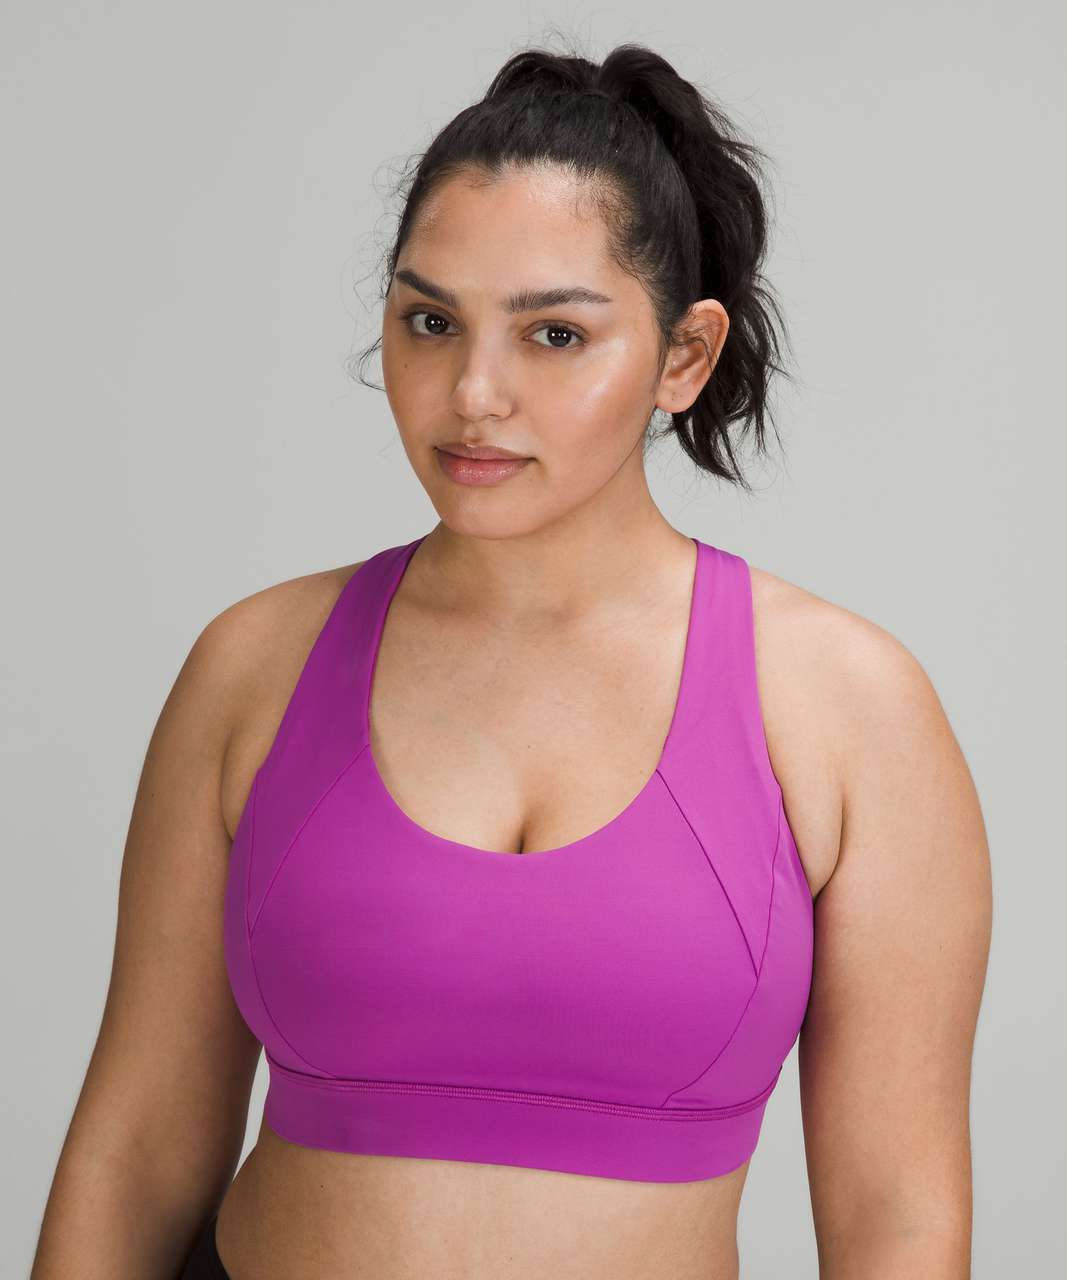 Lululemon Free to Be Elevated Bra *Light Support, DD/DDD(E) Cup - Vivid Plum